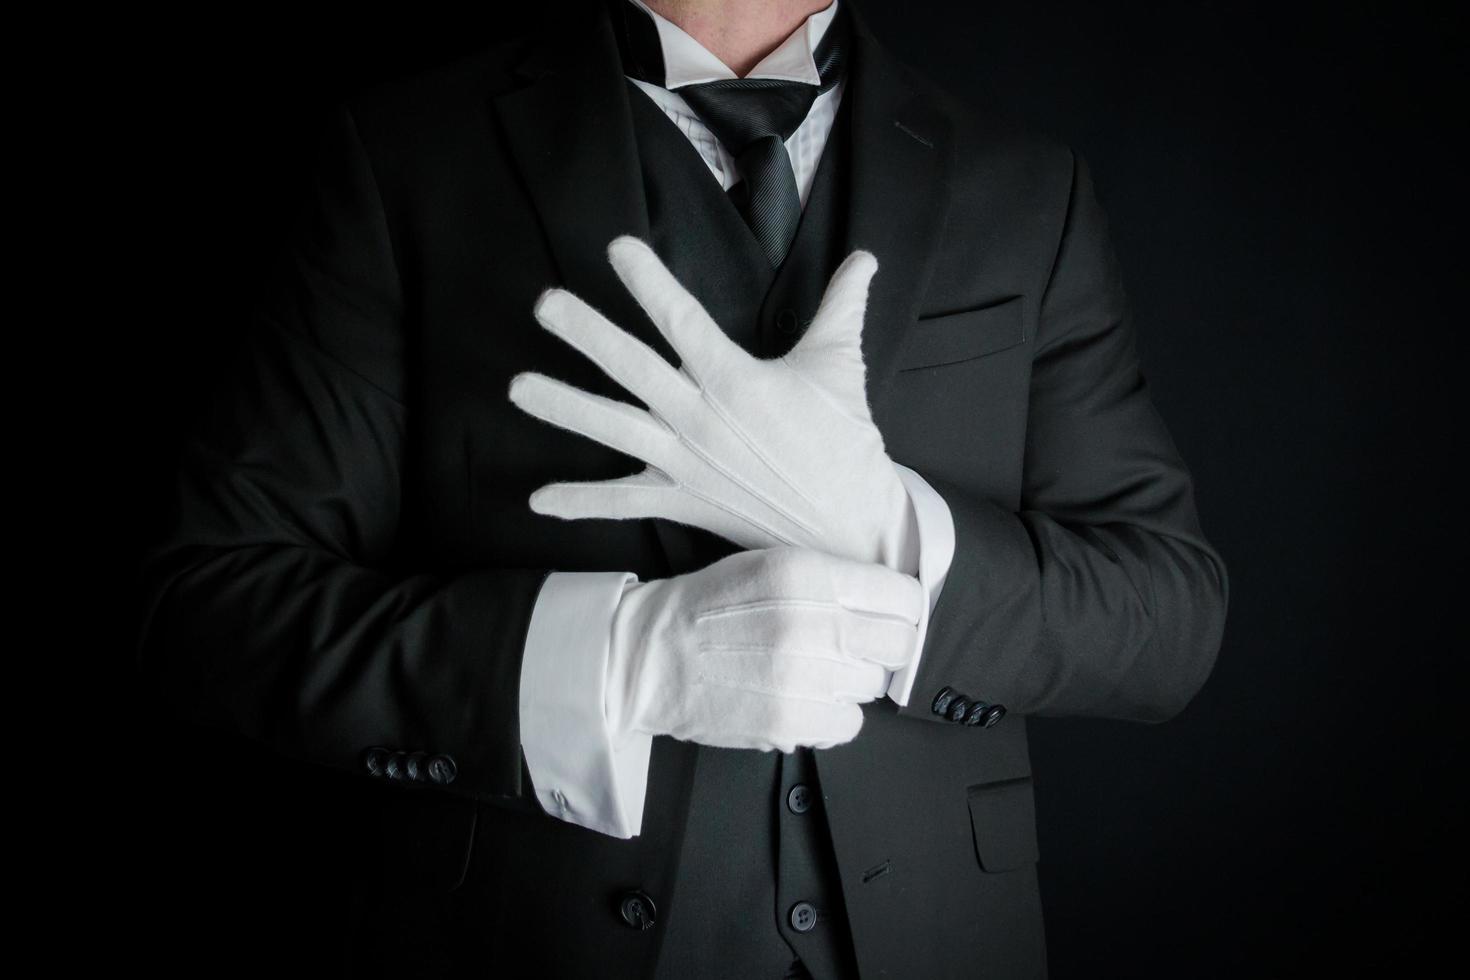 Portrait of Butler in Dark Suit on Black Background Pulling on Clean White Gloves. Concept of Service Industry and Professional Hospitality. photo